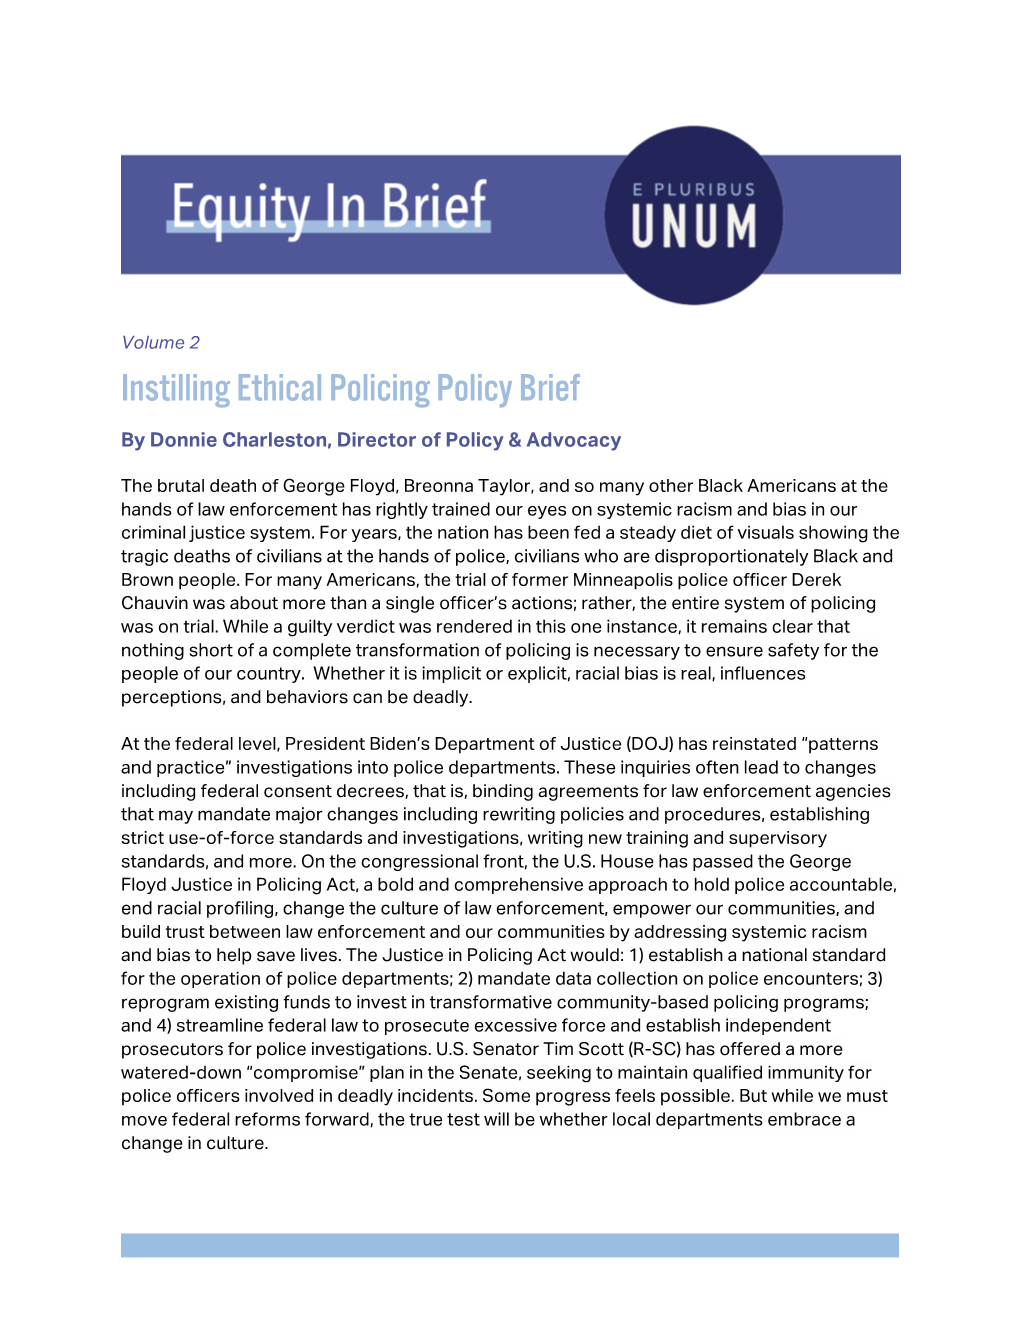 Instilling Ethical Policing Policy Brief by Donnie Charleston, Director of Policy & Advocacy